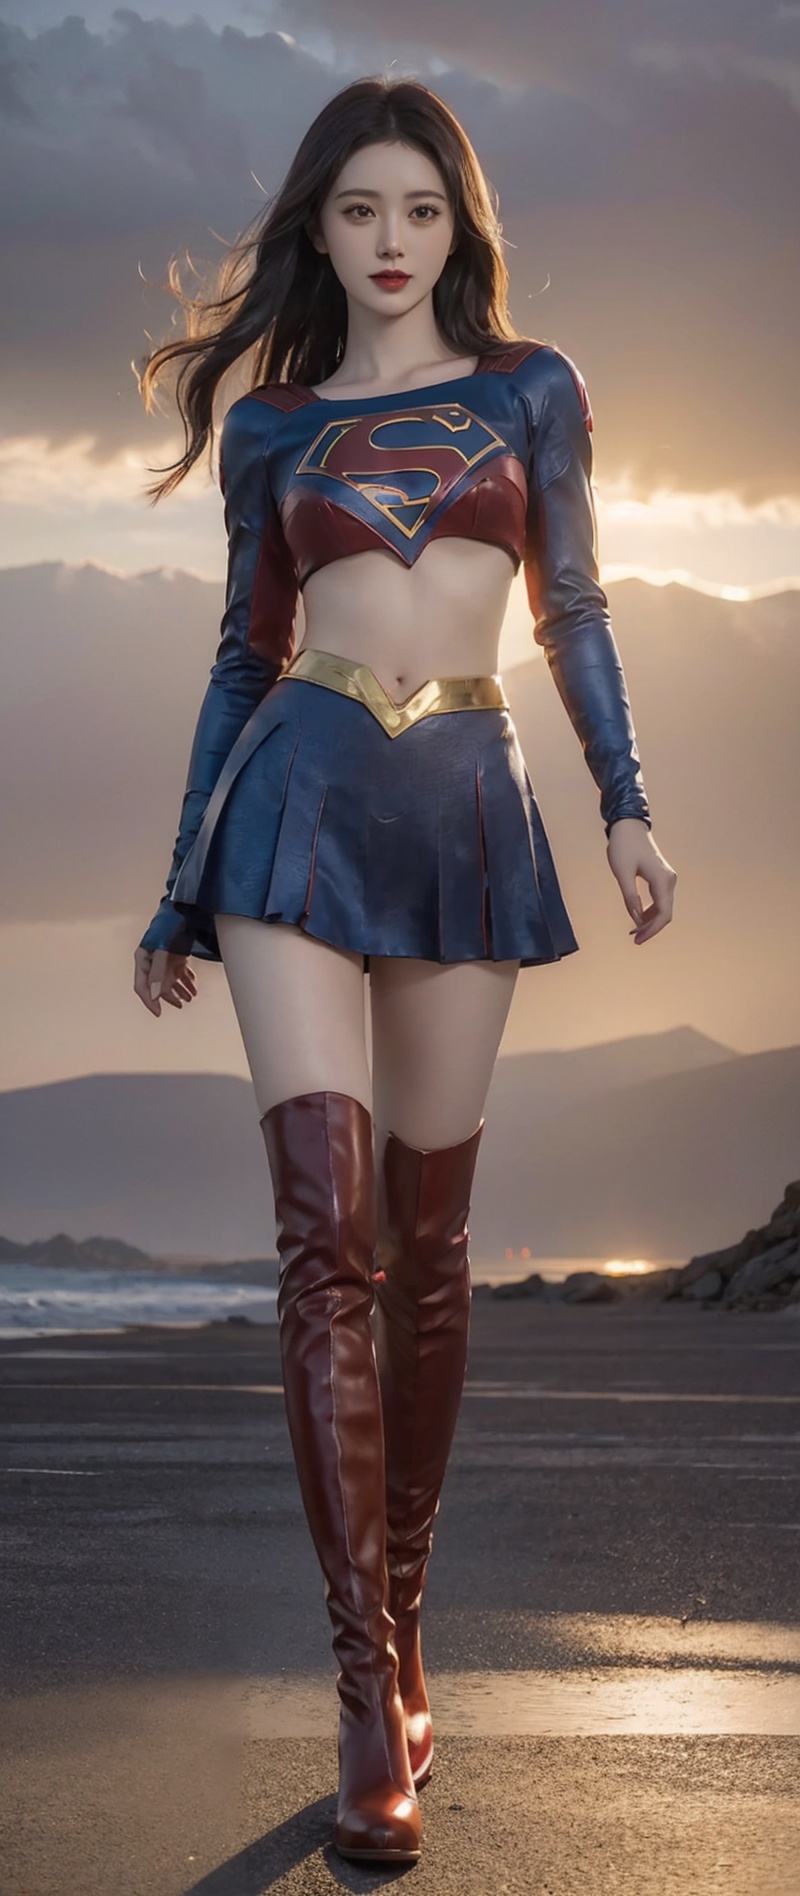  a hero supergirl ,25 age , green eyes , long brown hair , pantie , sport figure , full body , big boobs,fly in the sky with golden clouds,supergirl. Red long leg boots.,Blademancer. Clouds,Blademancer, linyuner